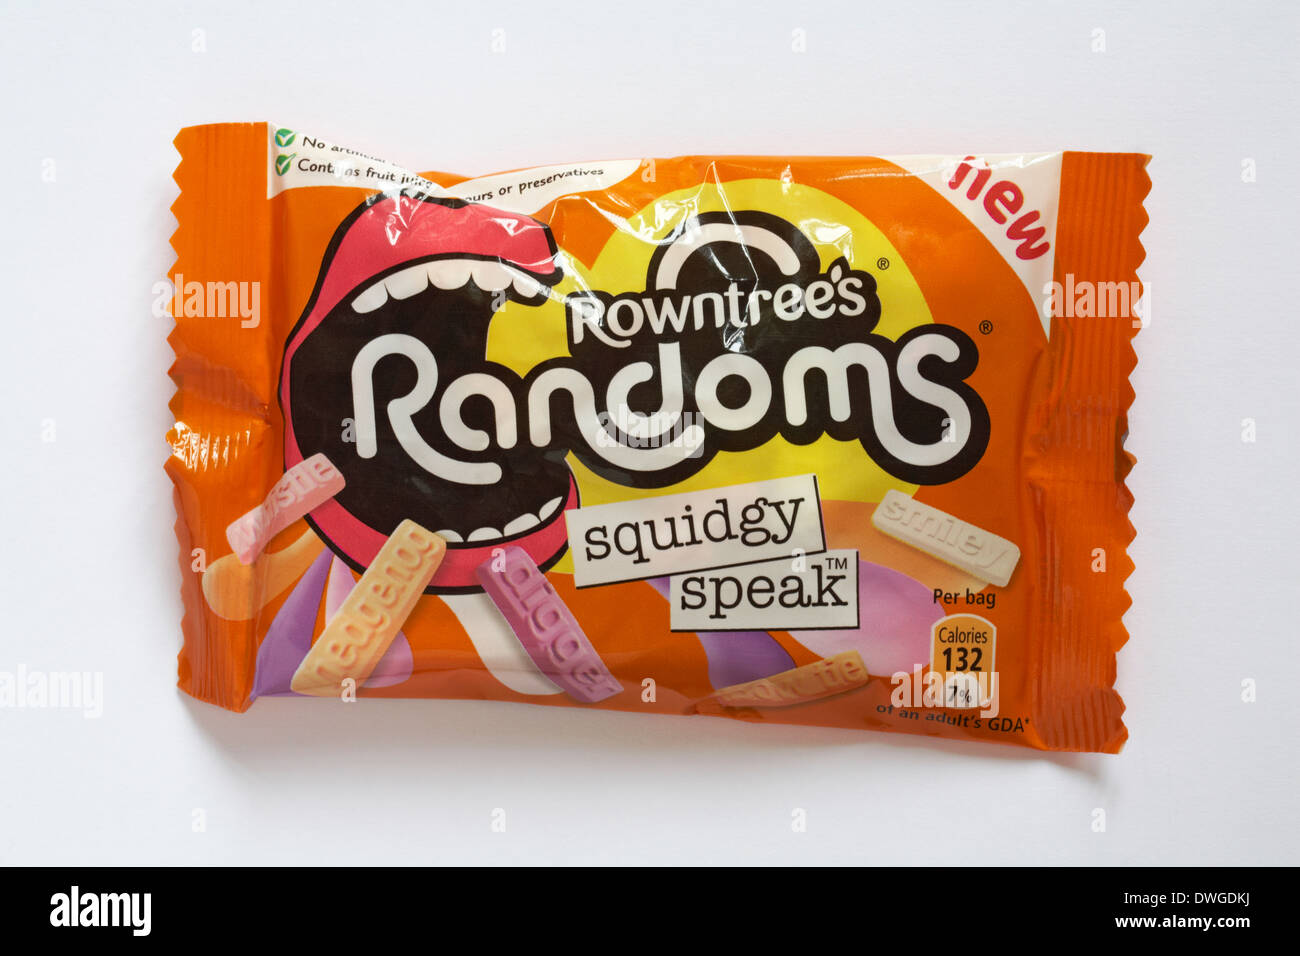 packet of new Rowntree's Randoms squidgy speak sweets isolated on white background Stock Photo